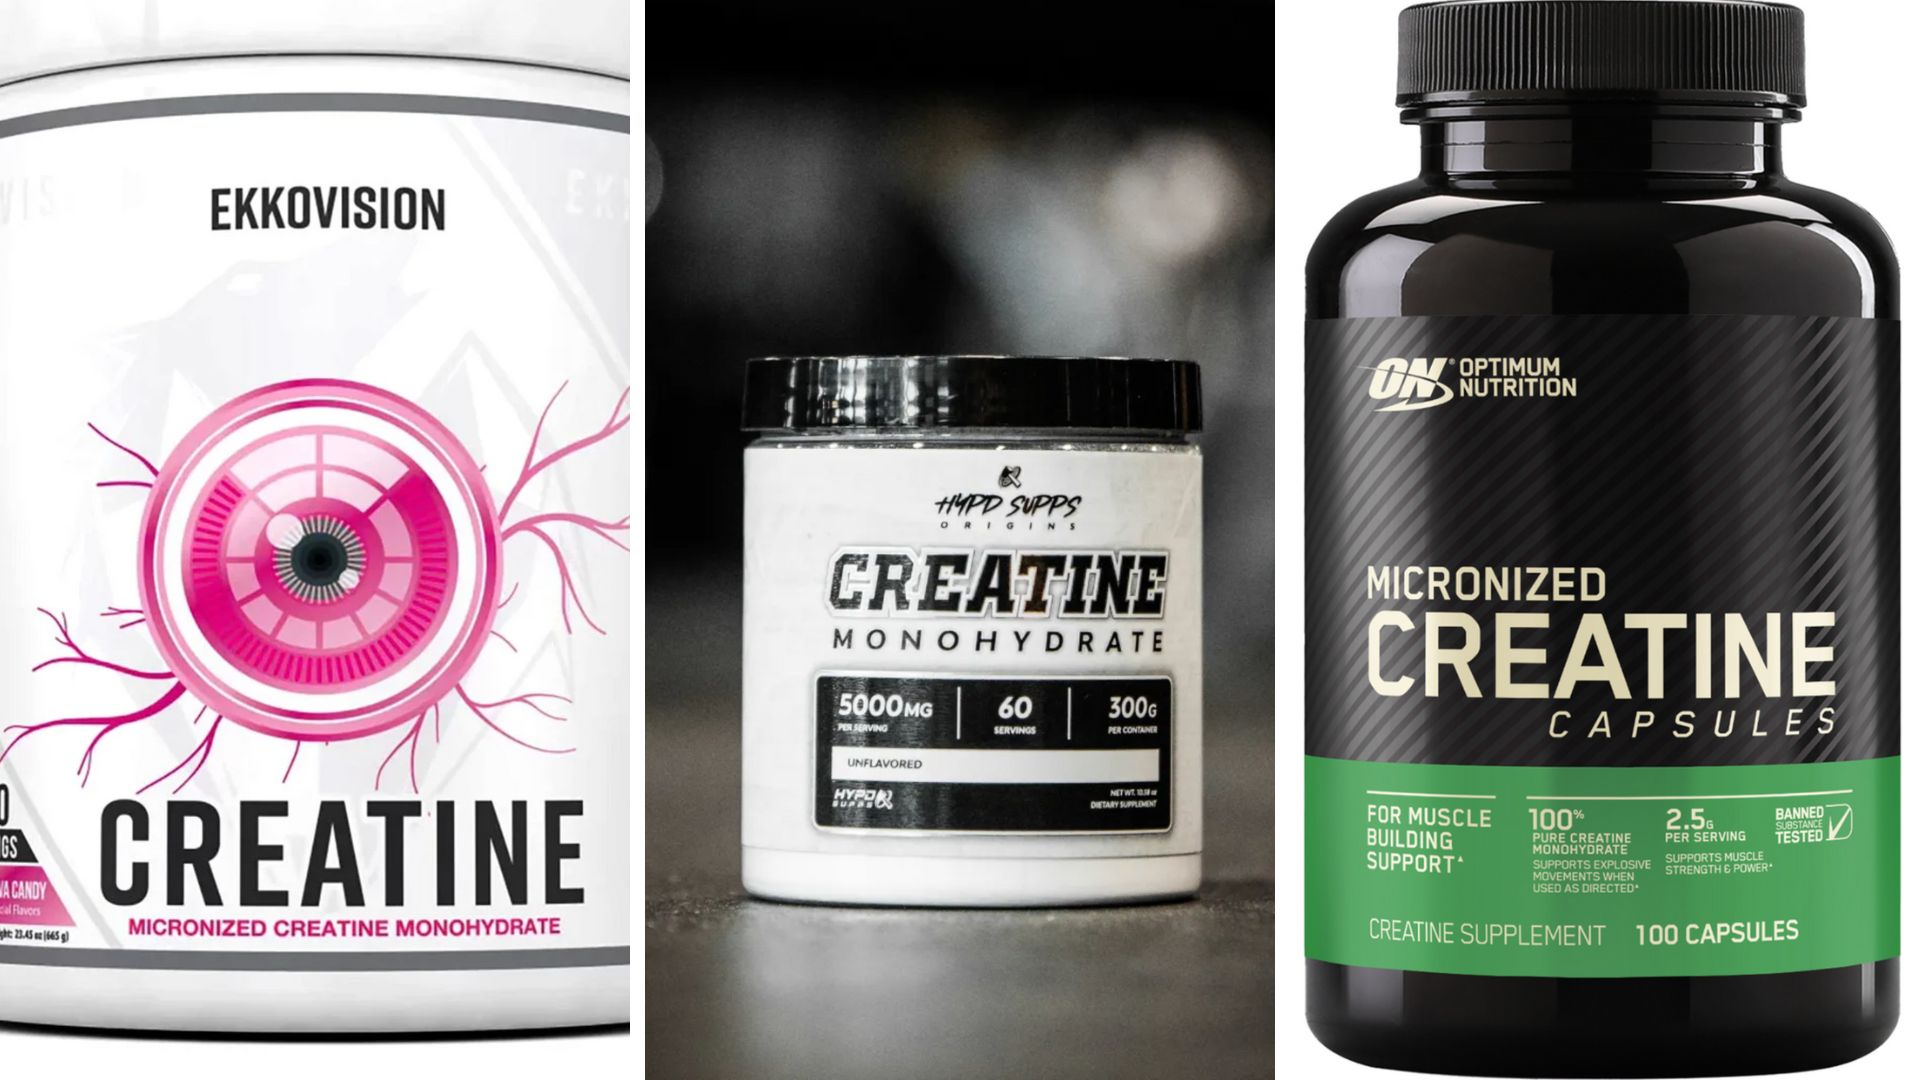 Different Types of Creatine When It Comes to Air Travel